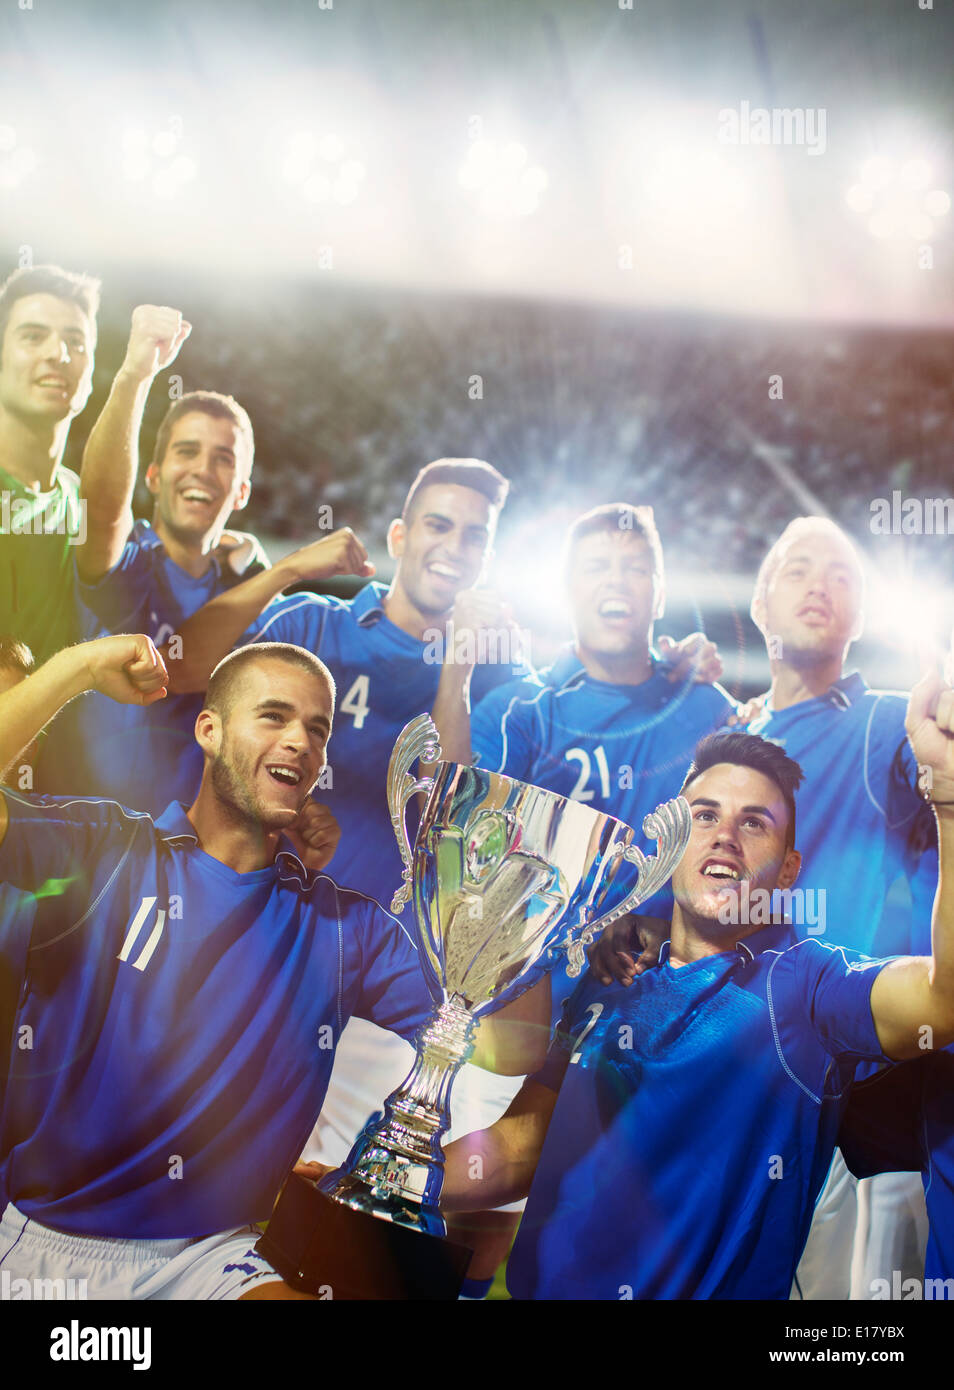 Soccer team celebrating with trophy in stadium Stock Photo